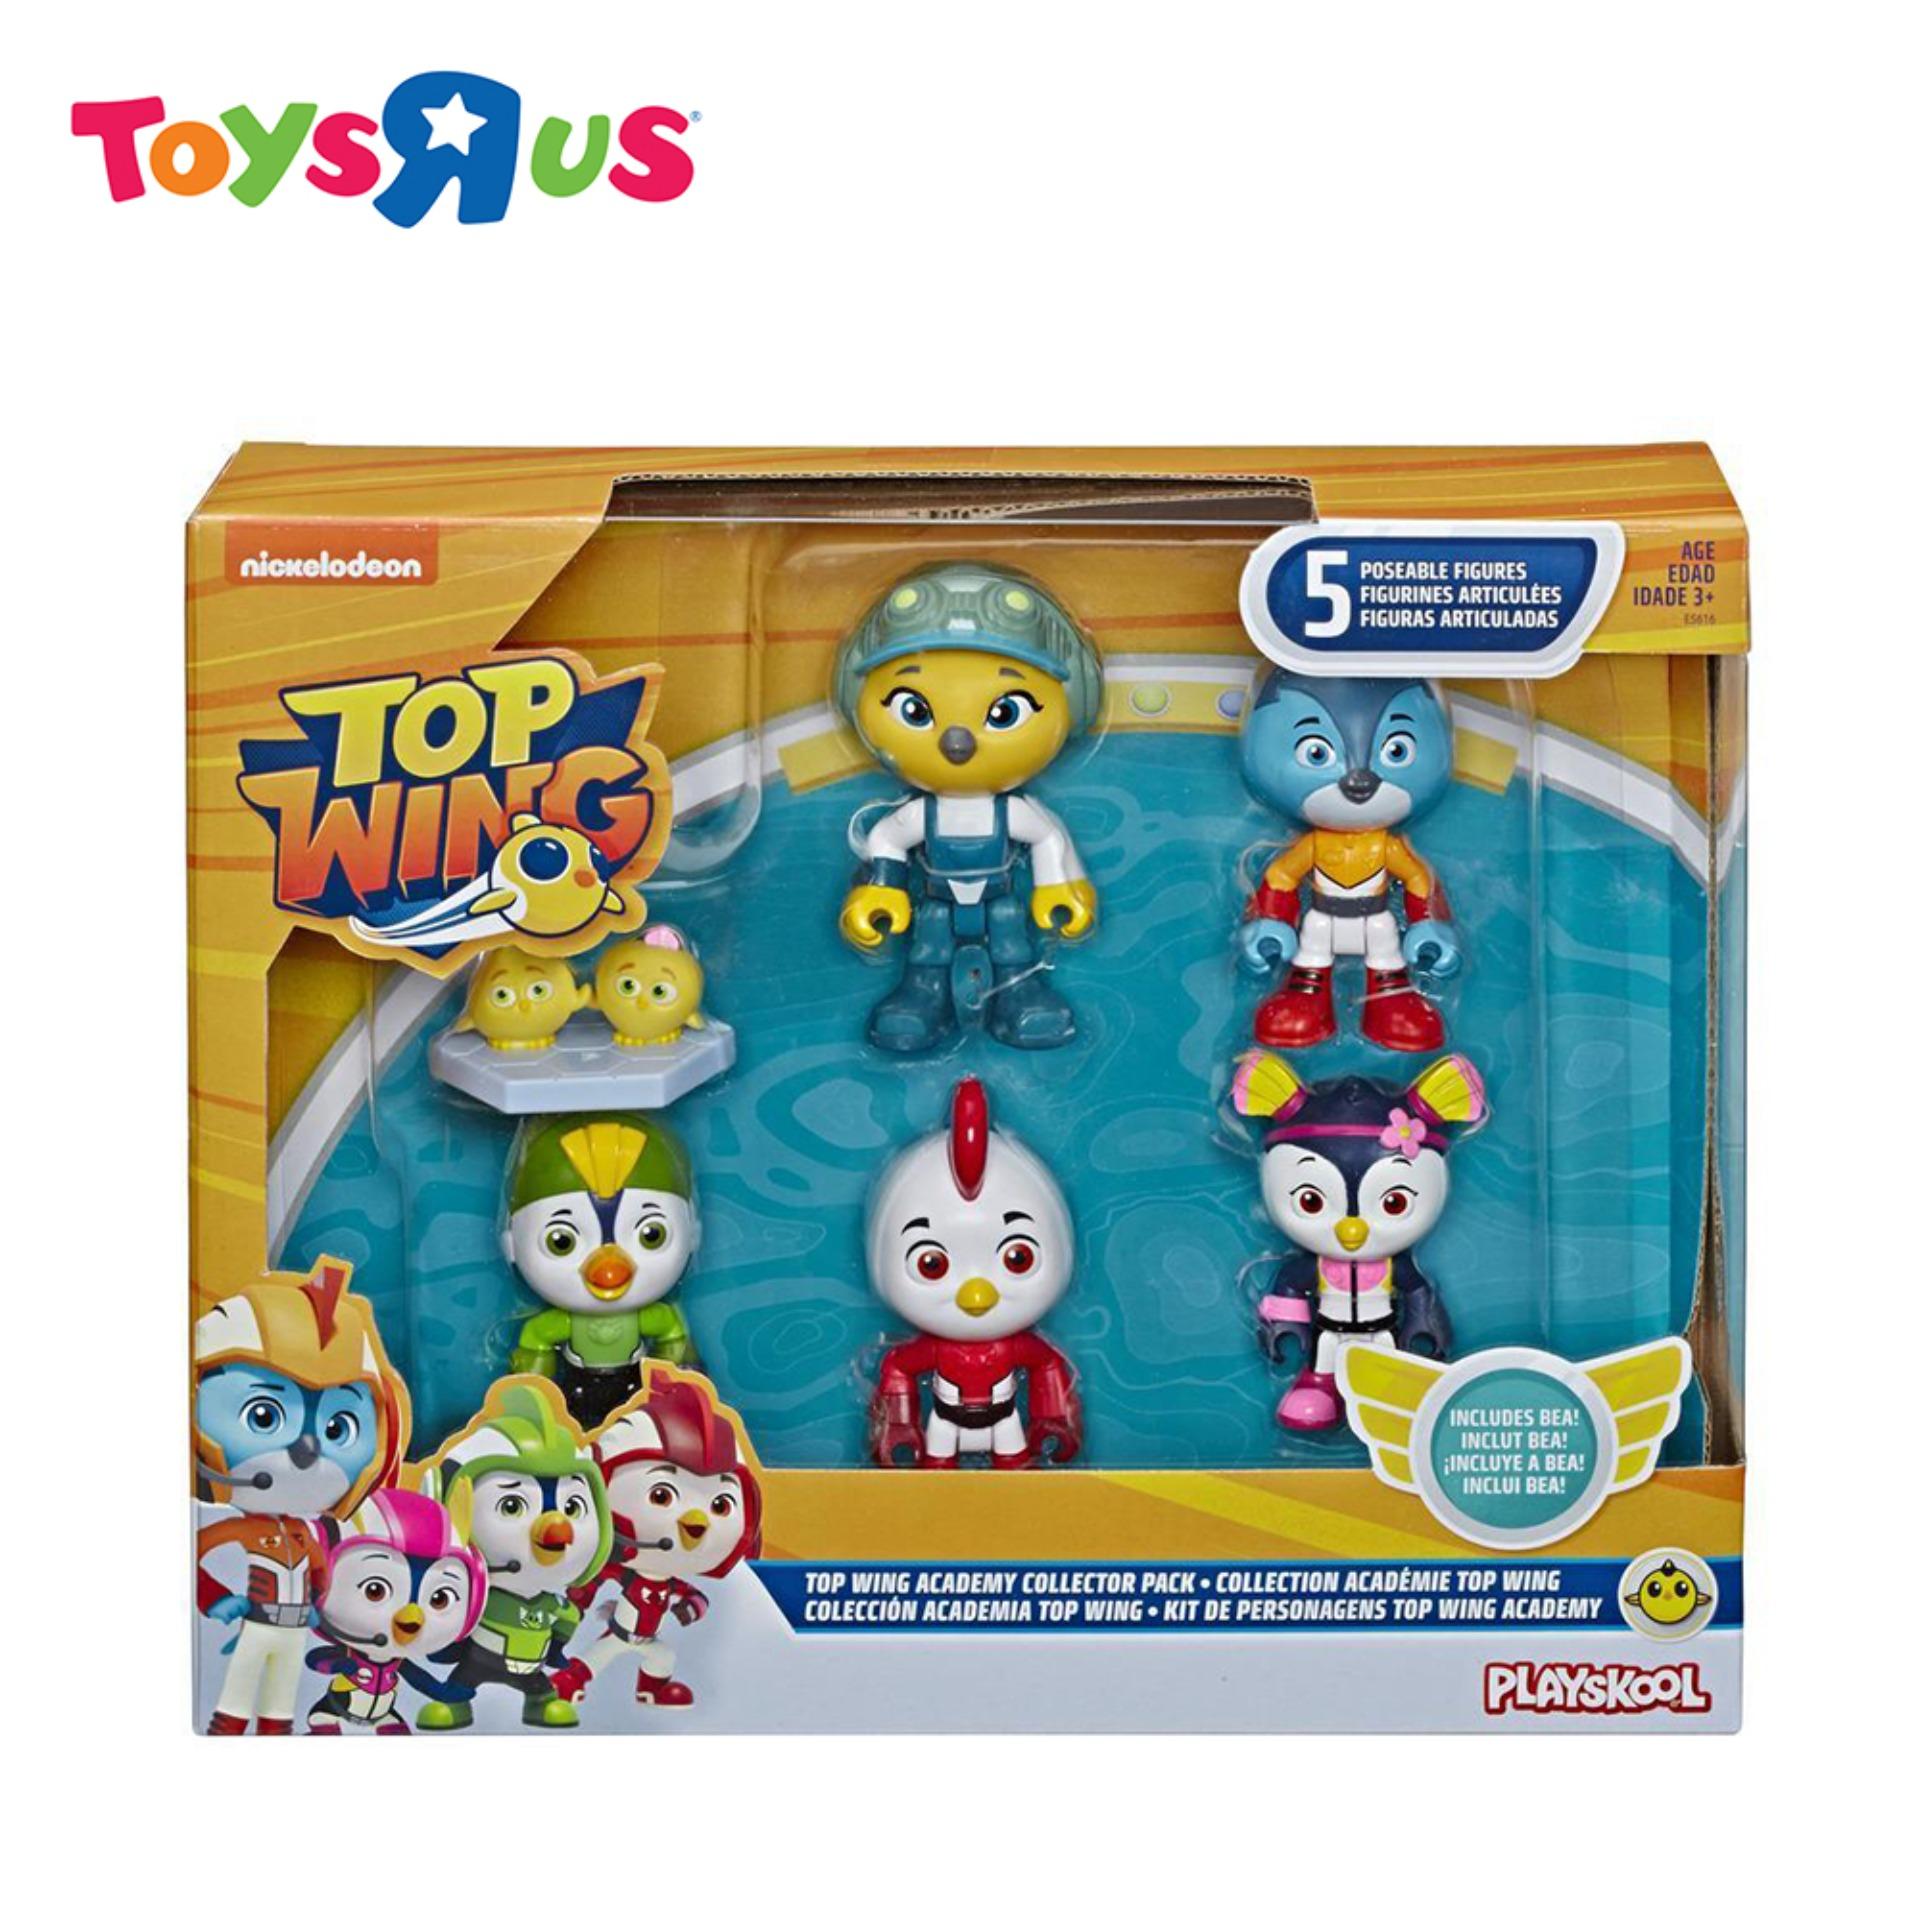 Top Wing Academy Collector Pack Includes 5 Poseable 3-inch Figures and Top  Wing Cheep & Chirp